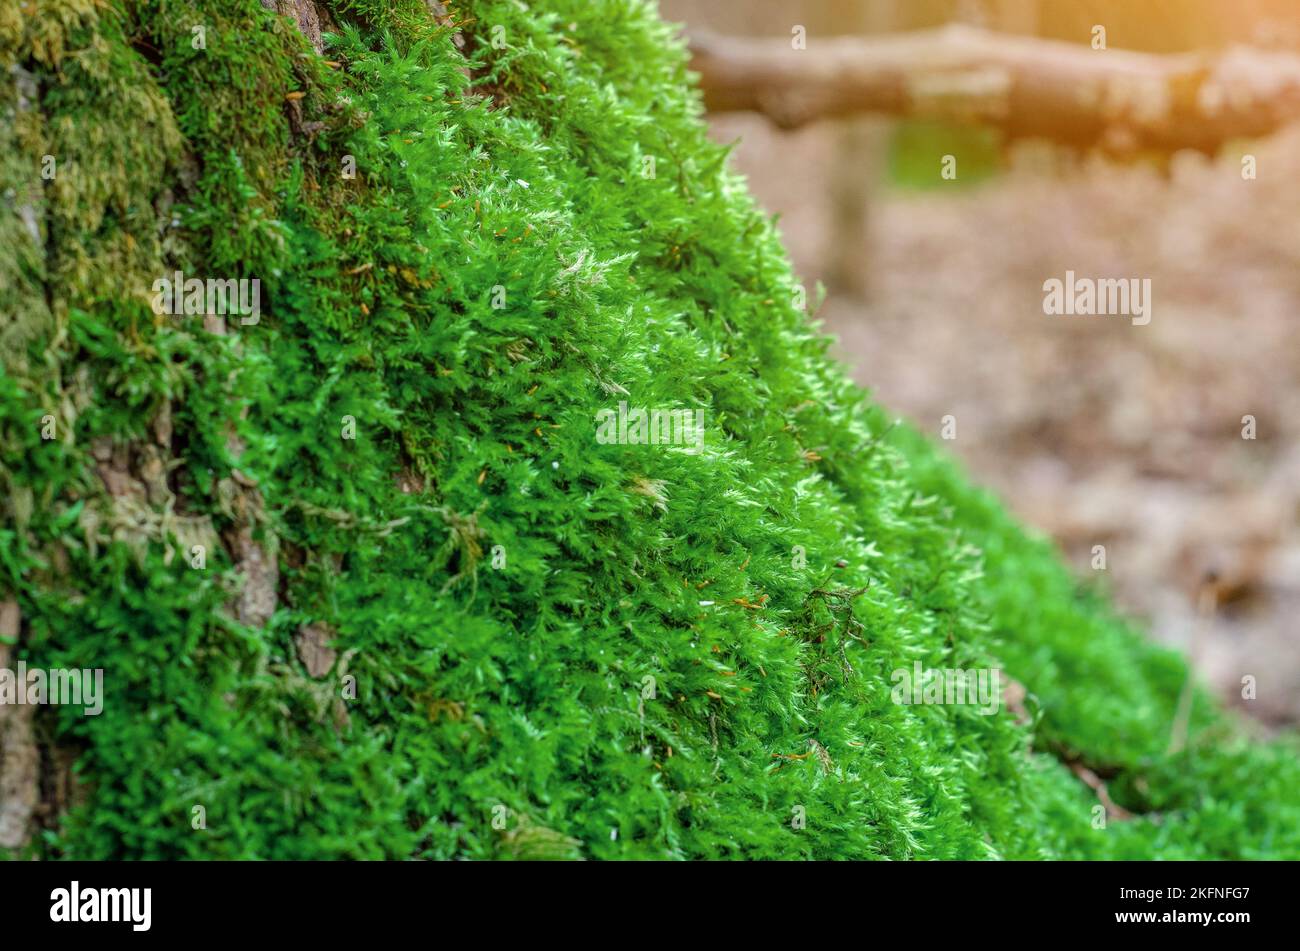 Green moss. Modern eco friendly decor made of colored stabilized moss. Natural background for design and text. Stock Photo